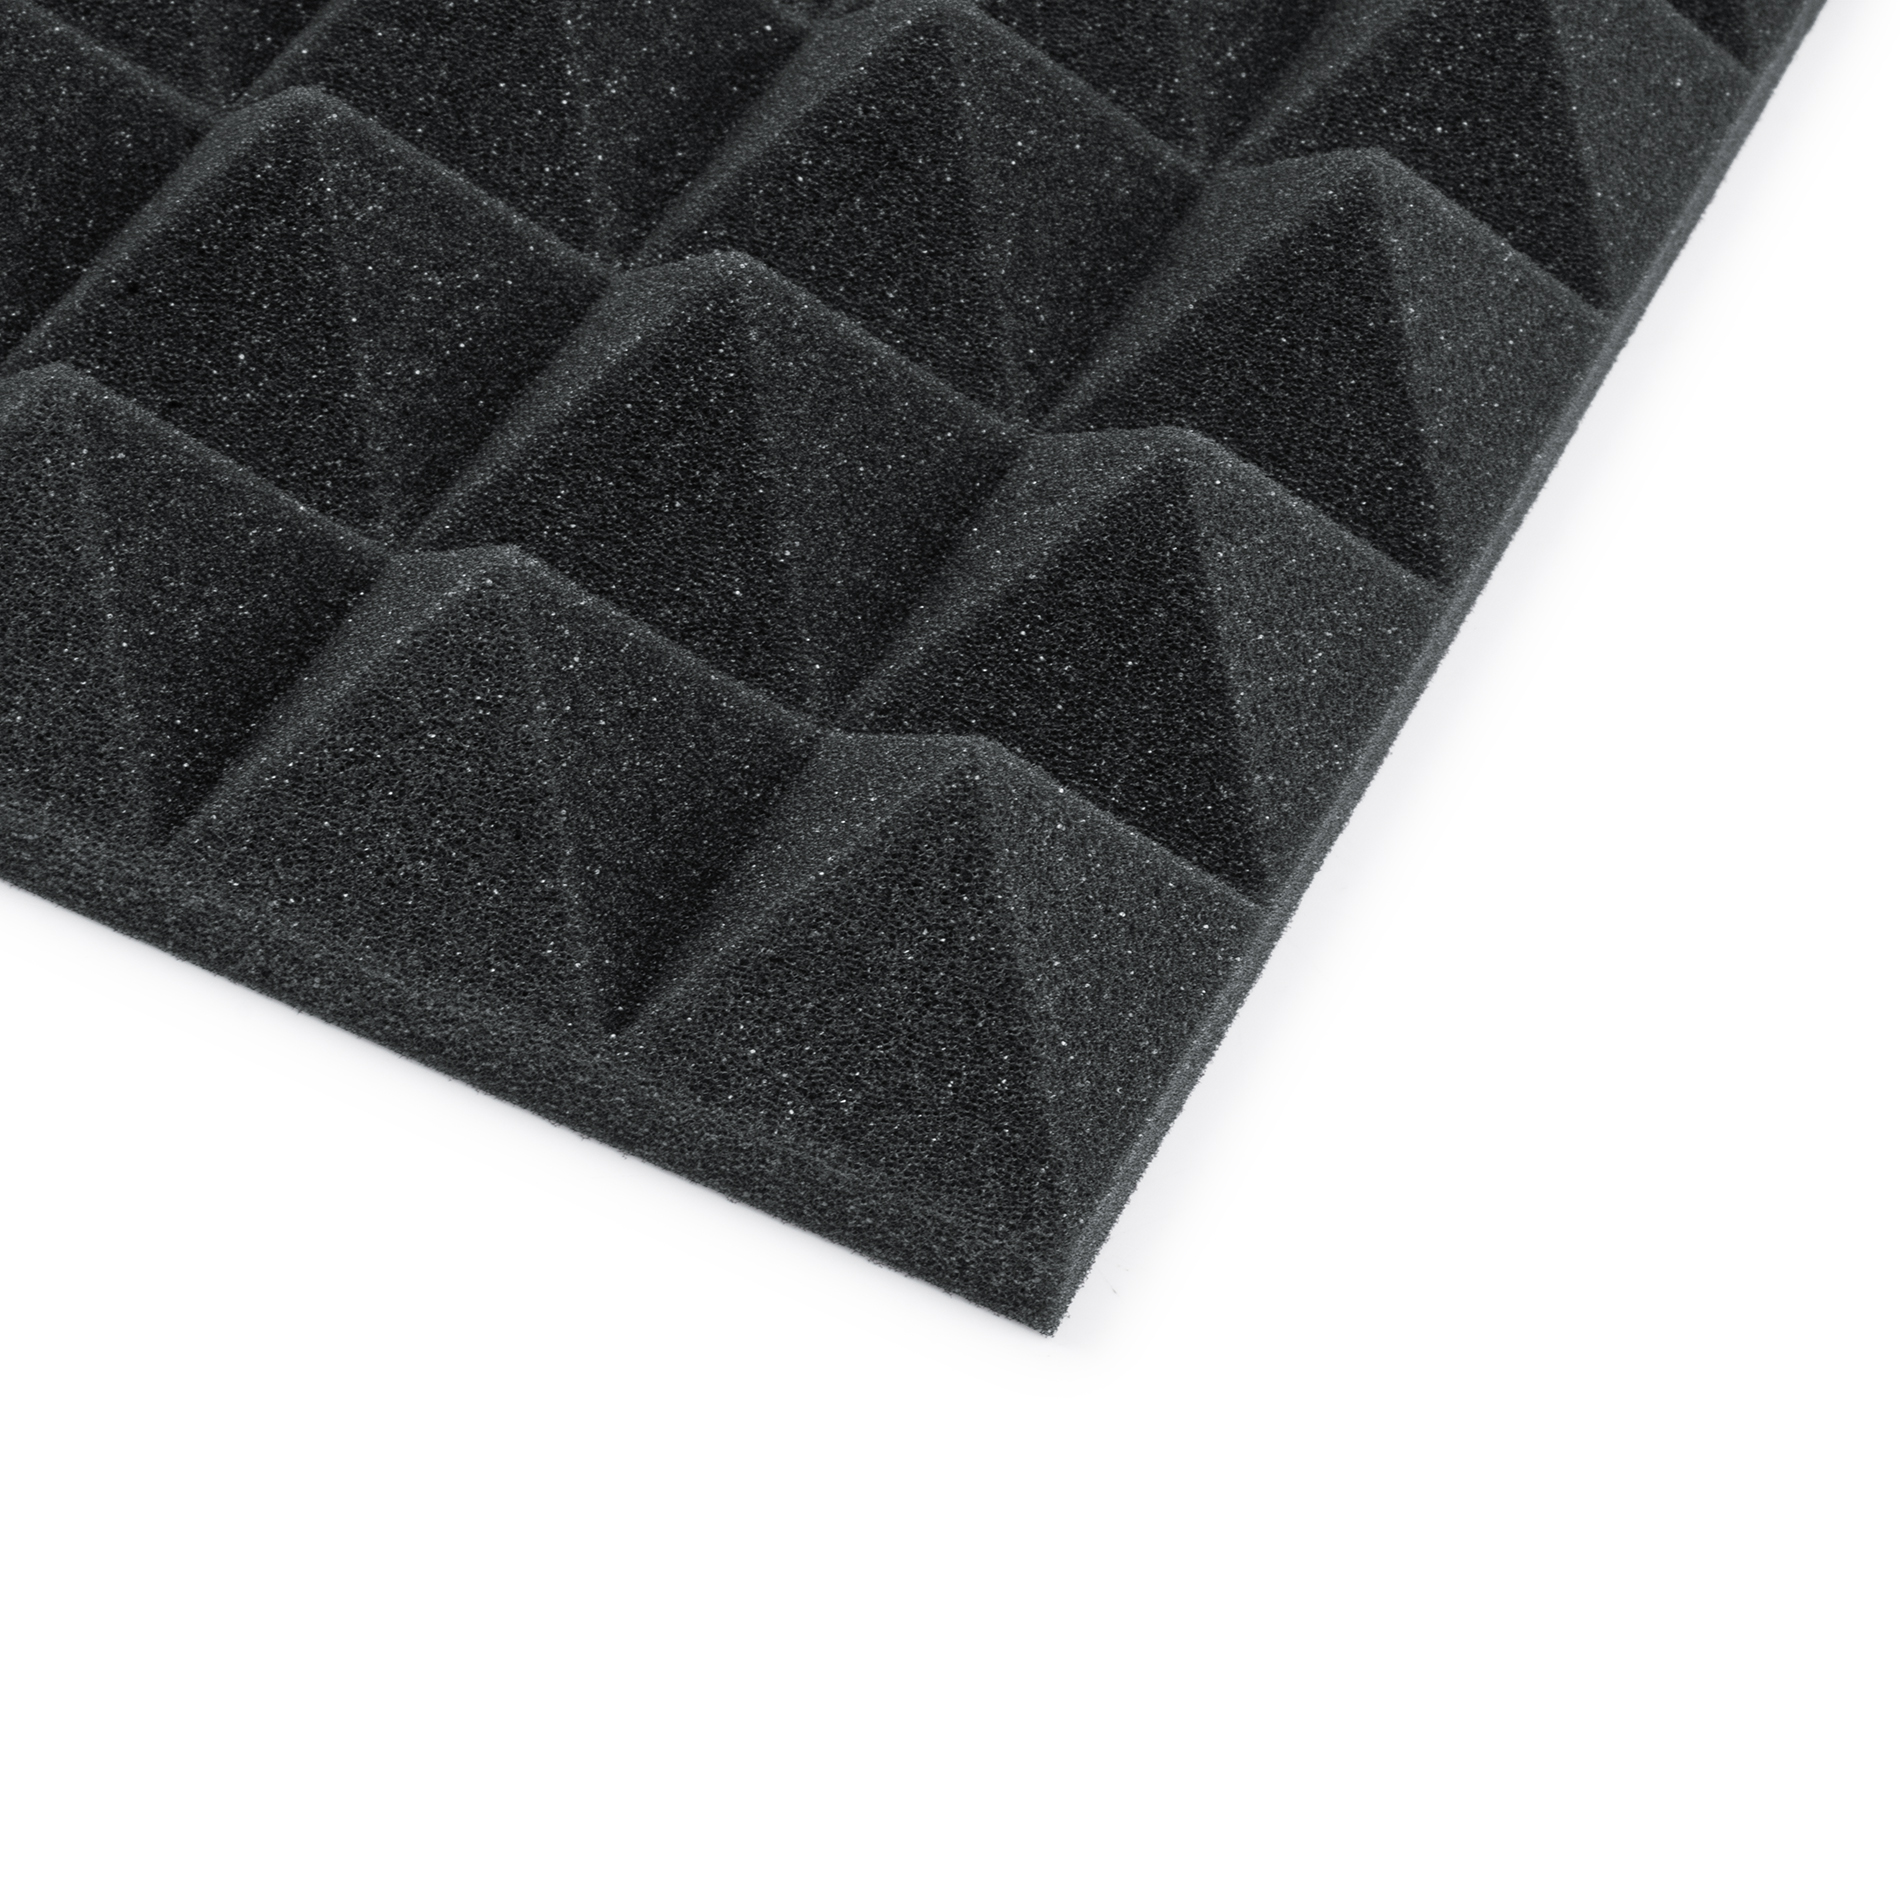 4 Pack of Charcoal 12×12″ Acoustic Pyramid Panel-GFW-ACPNL1212PCHA-4PK